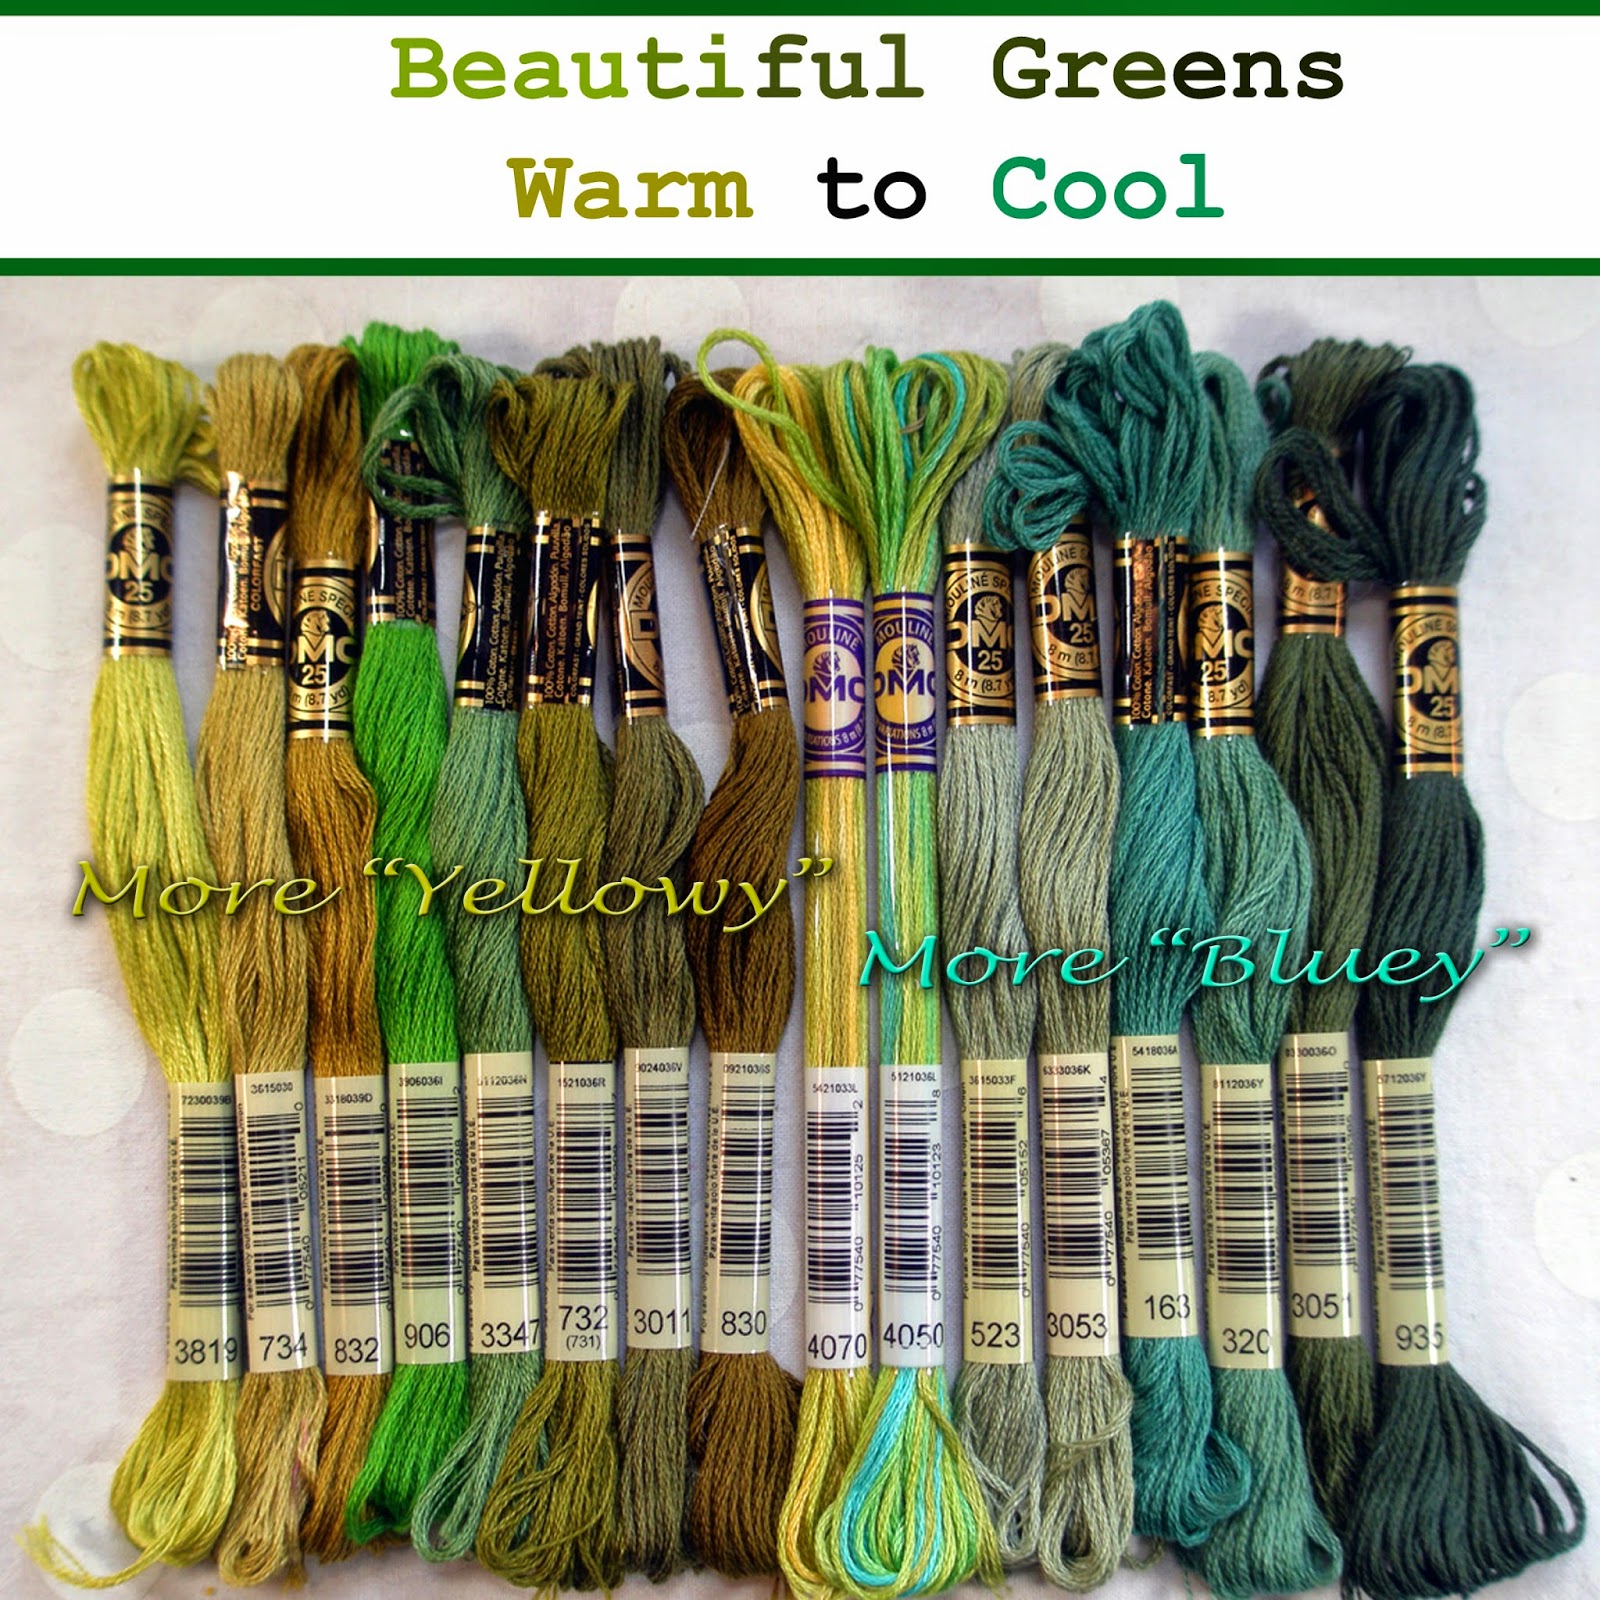 25 Anchor Embroidery Cotton Thread / Skeins / Floss in Green, Red, Blue,  Yellow, Brown Combinations 